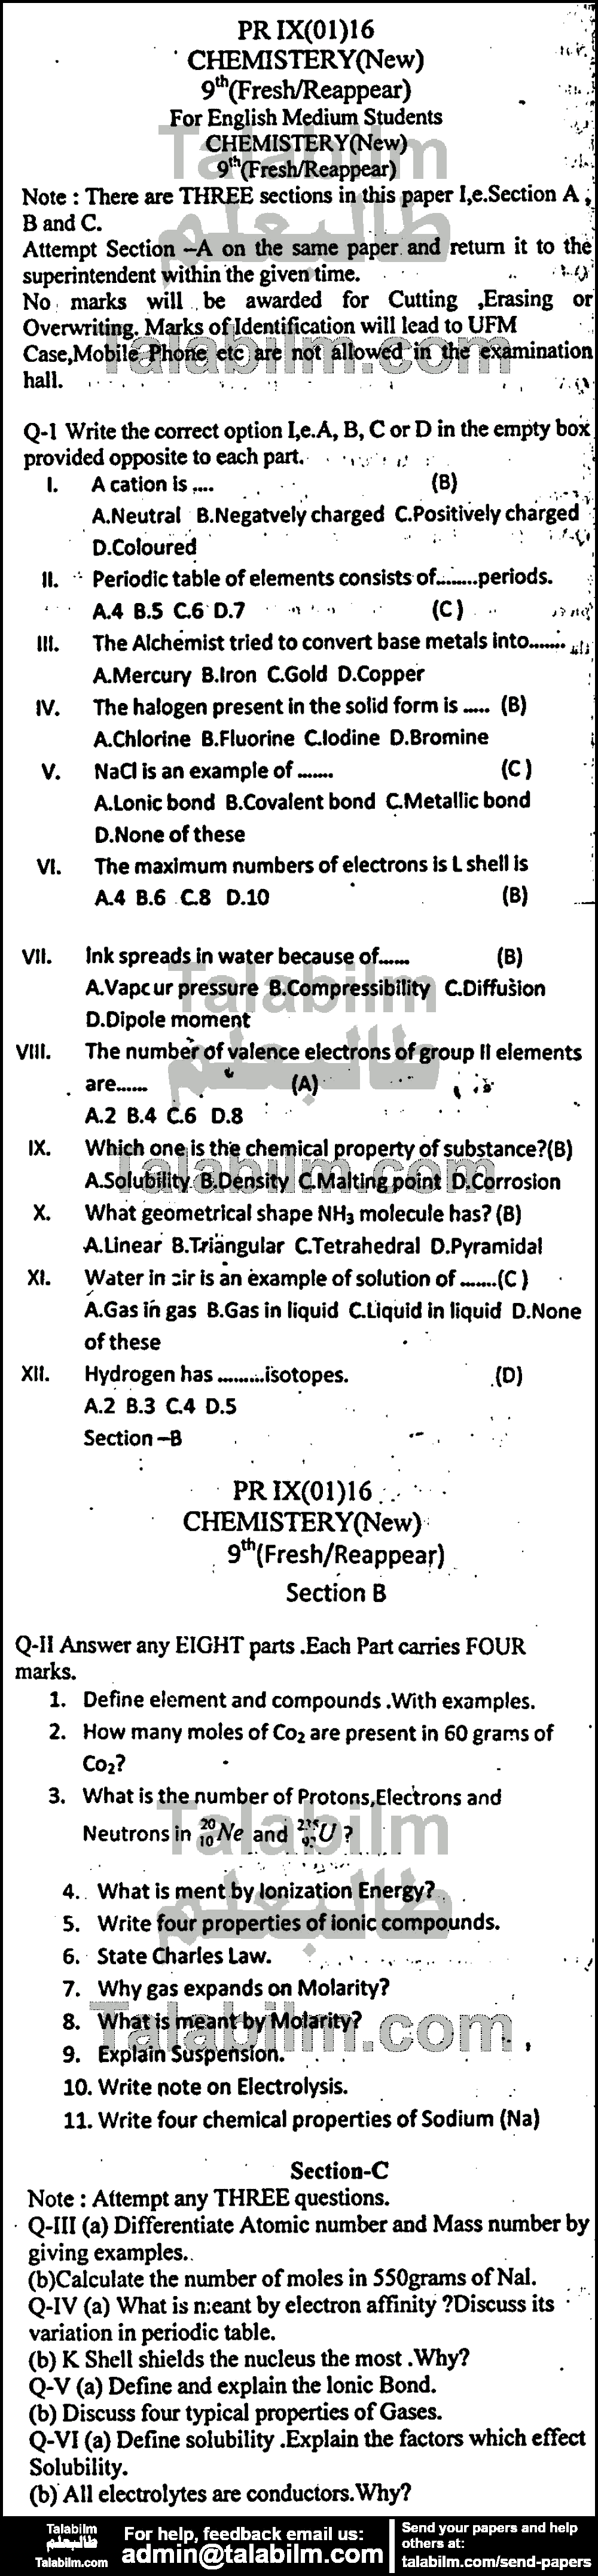 Chemistry 0 past paper for English Medium 2016 Group-I